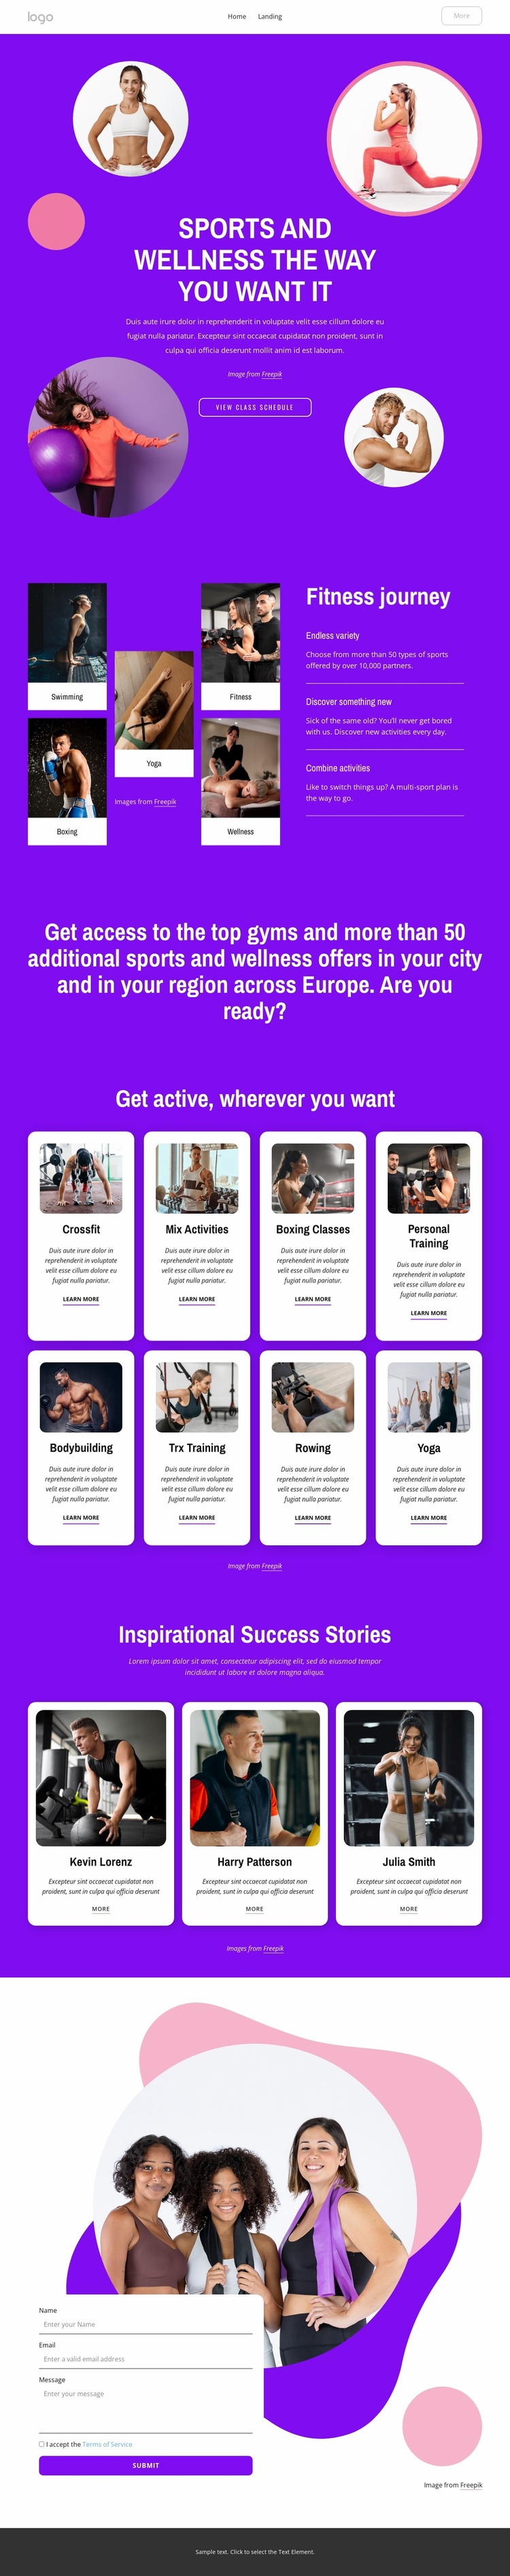 Sports and wellness the way you want it Website Template